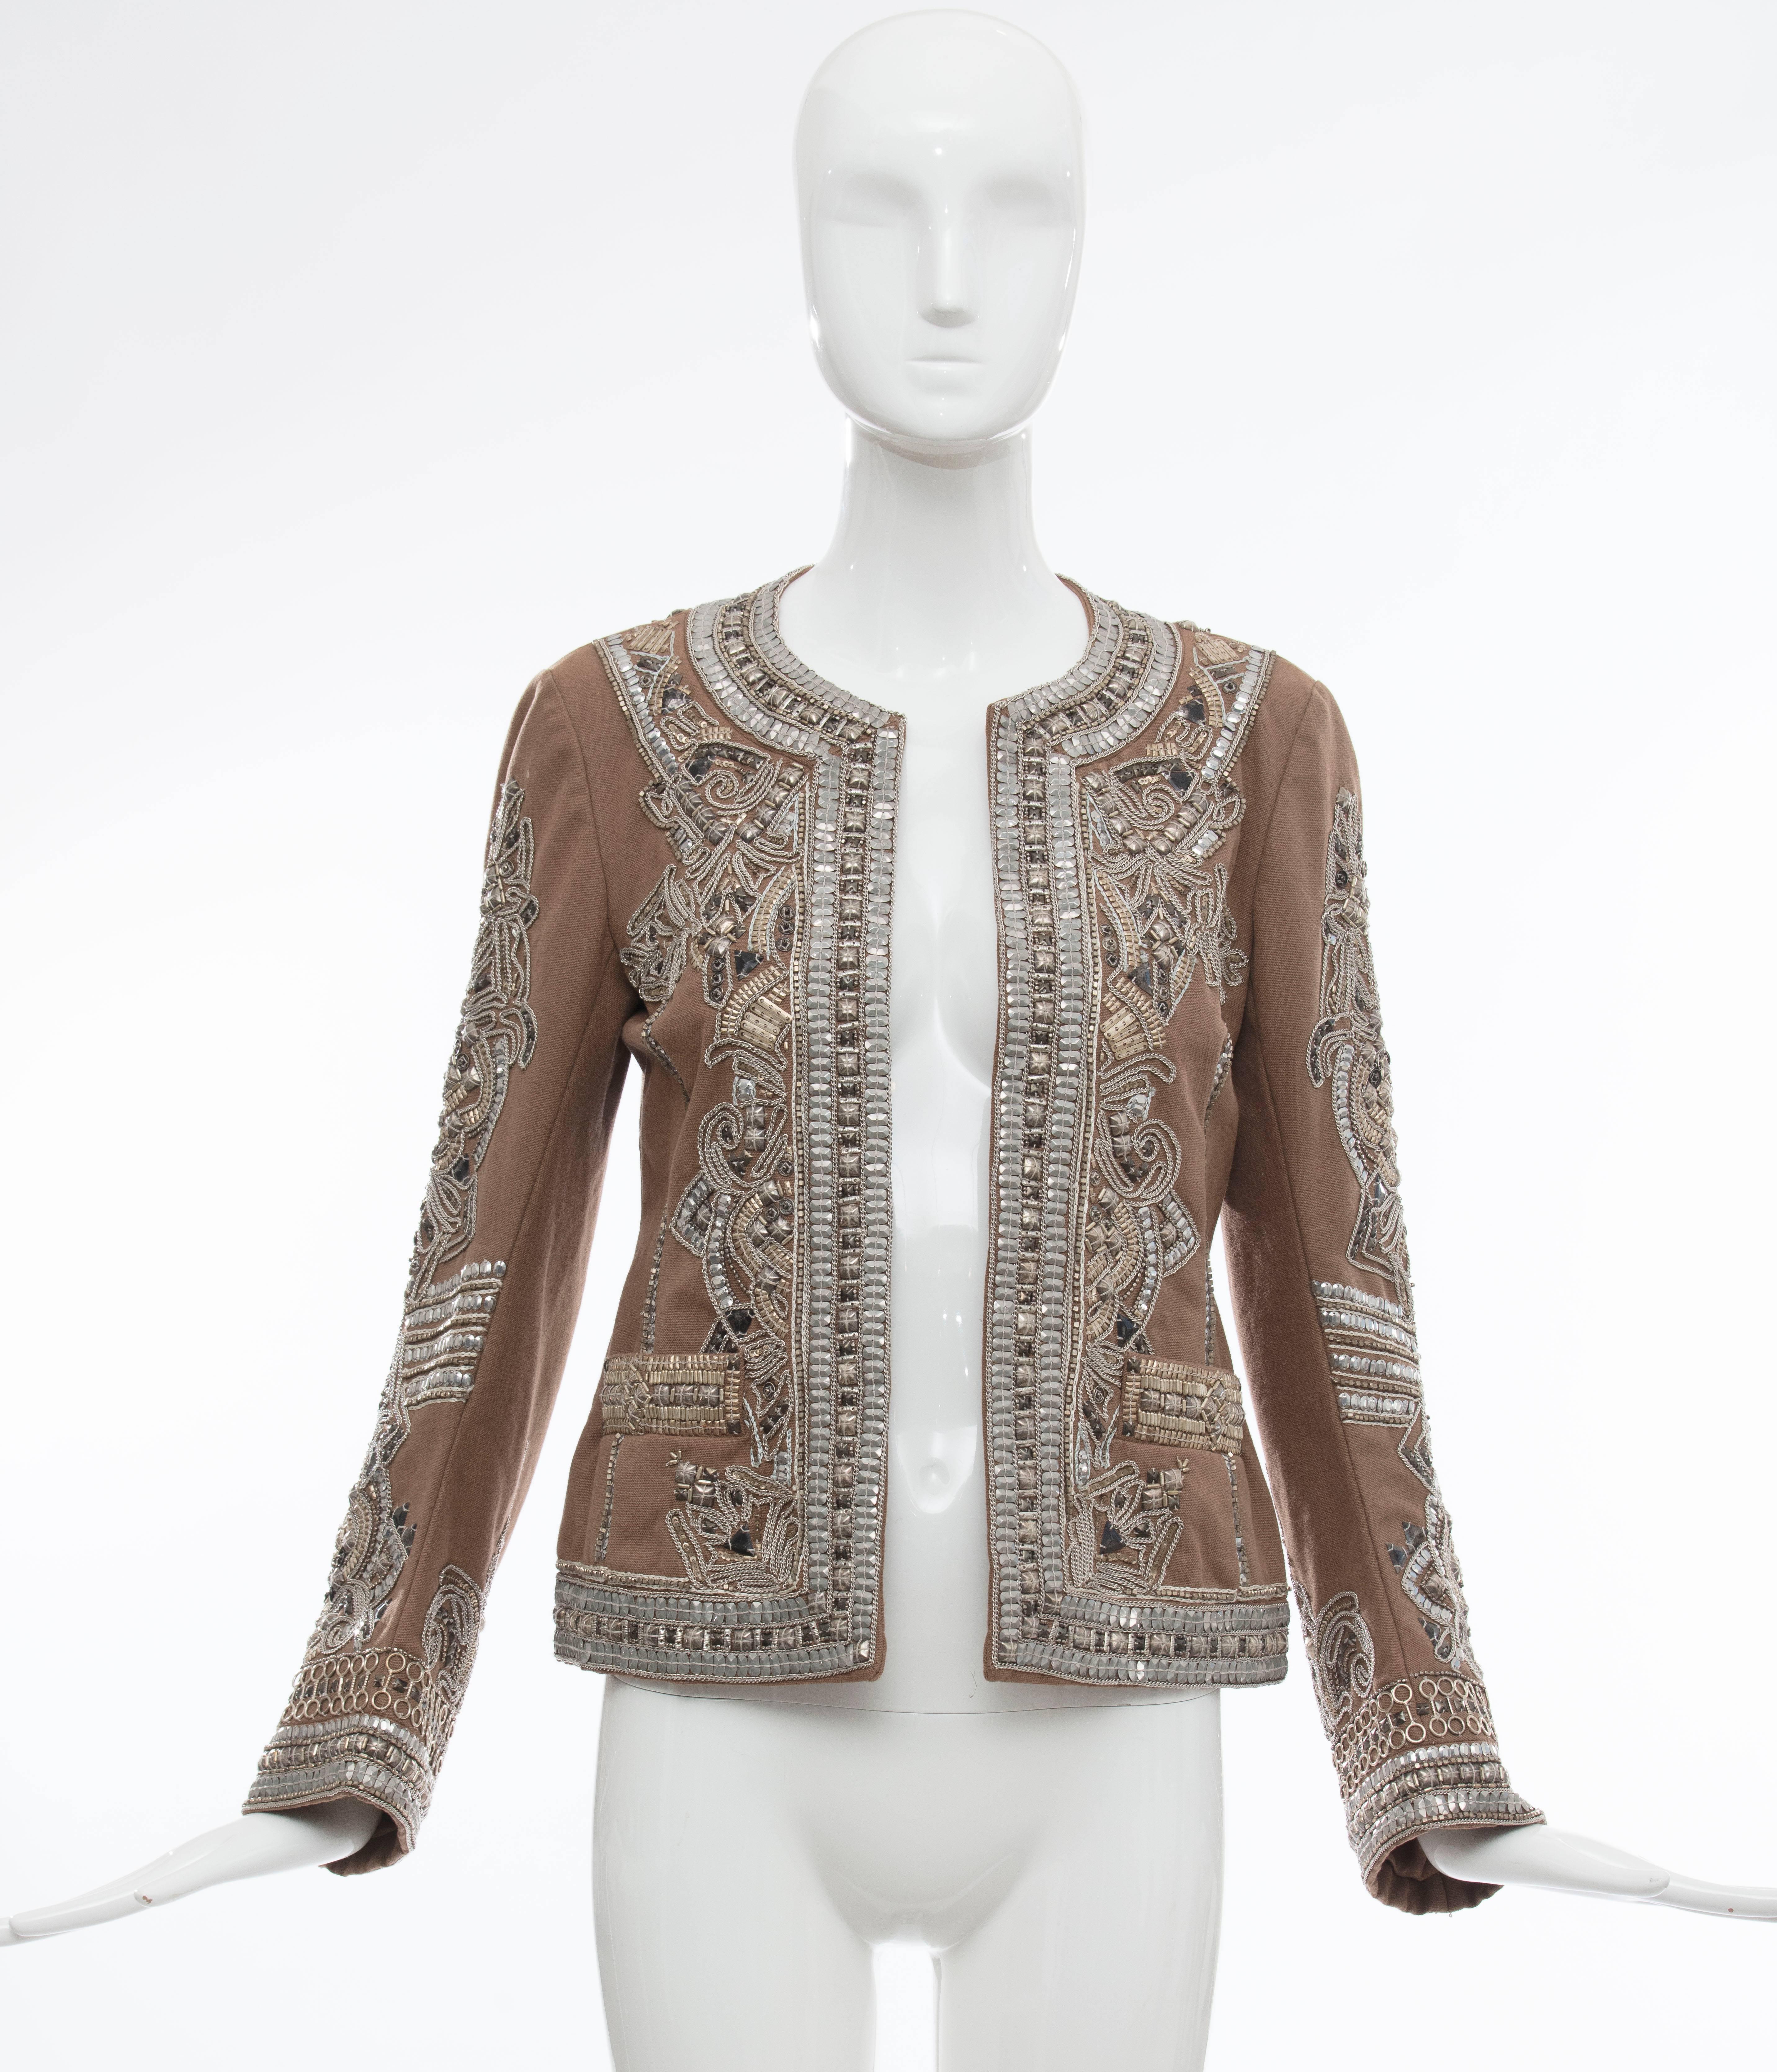 Dries Van Noten, Autumn-Winter 2008 cotton embroidered jacket with silver Indian thread, mandarin collar, dual welt pocket at sides and open at front.

IT. 36
US. 4

Bust: 33, Waist 32, Shoulder 15, Length 21.5, Sleeve 26.5

